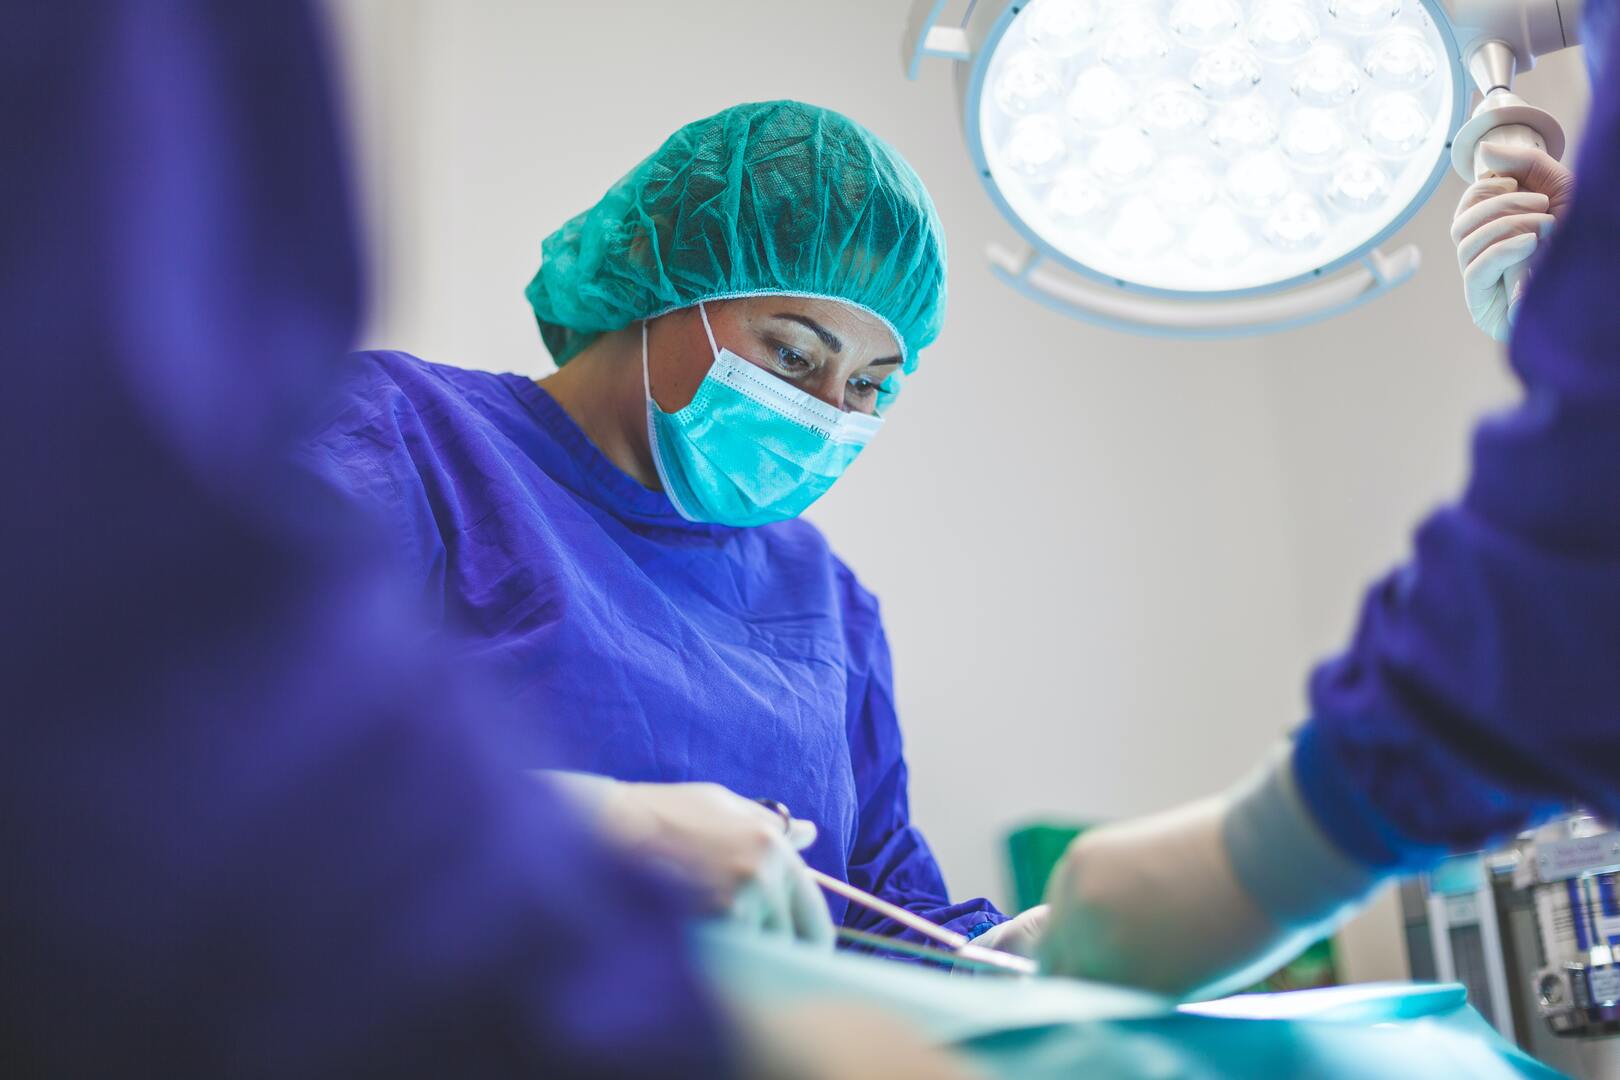 Picture of a surgeon during a procedure